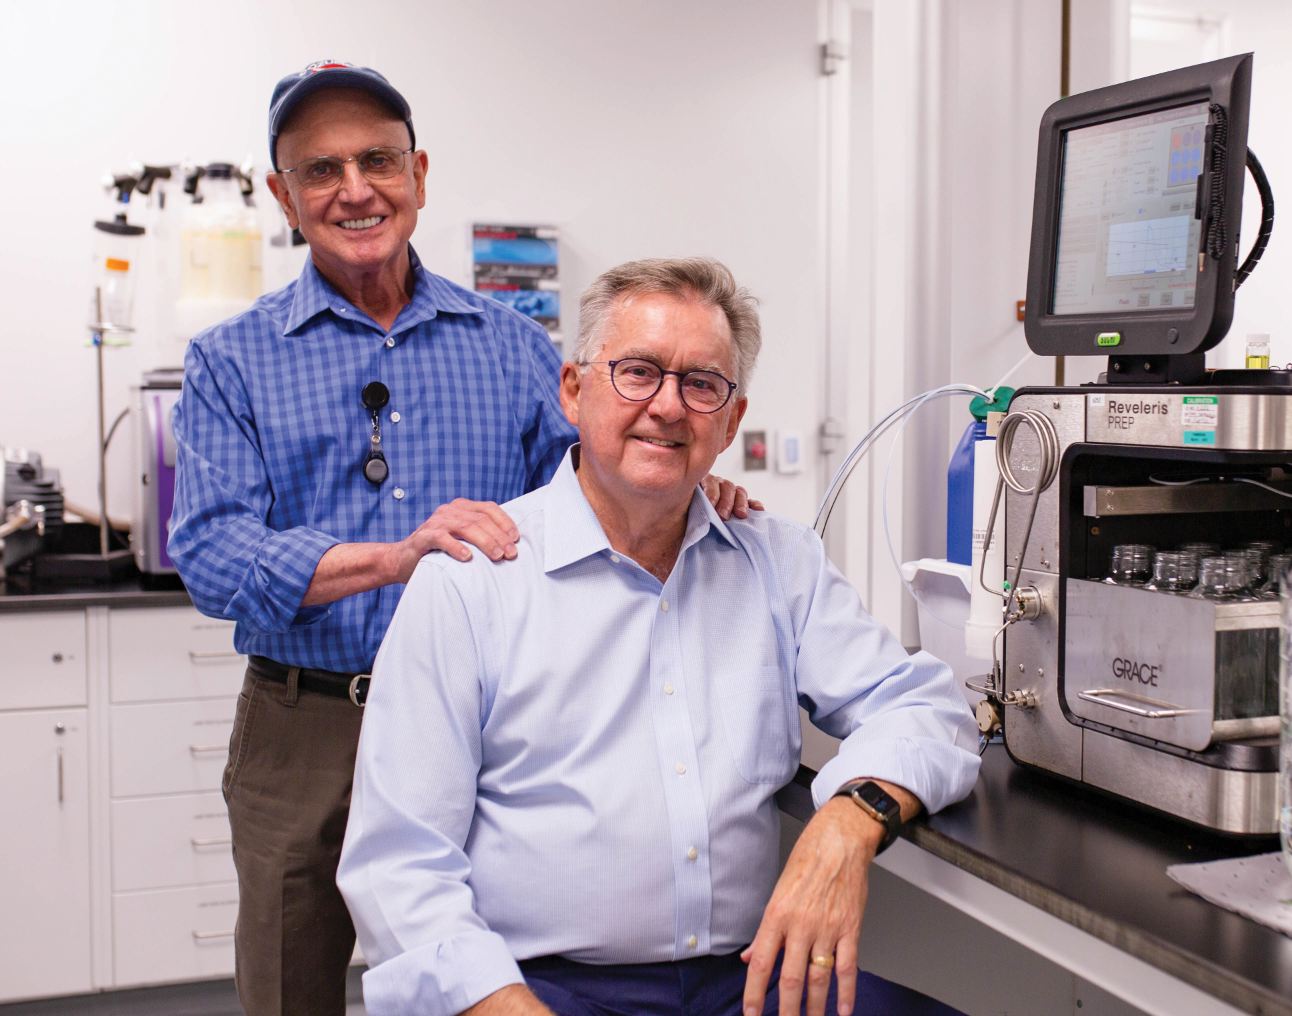 Dr. Garry Kiefer (left), Macrocyclics CEO, and Dr. Dean Sherry